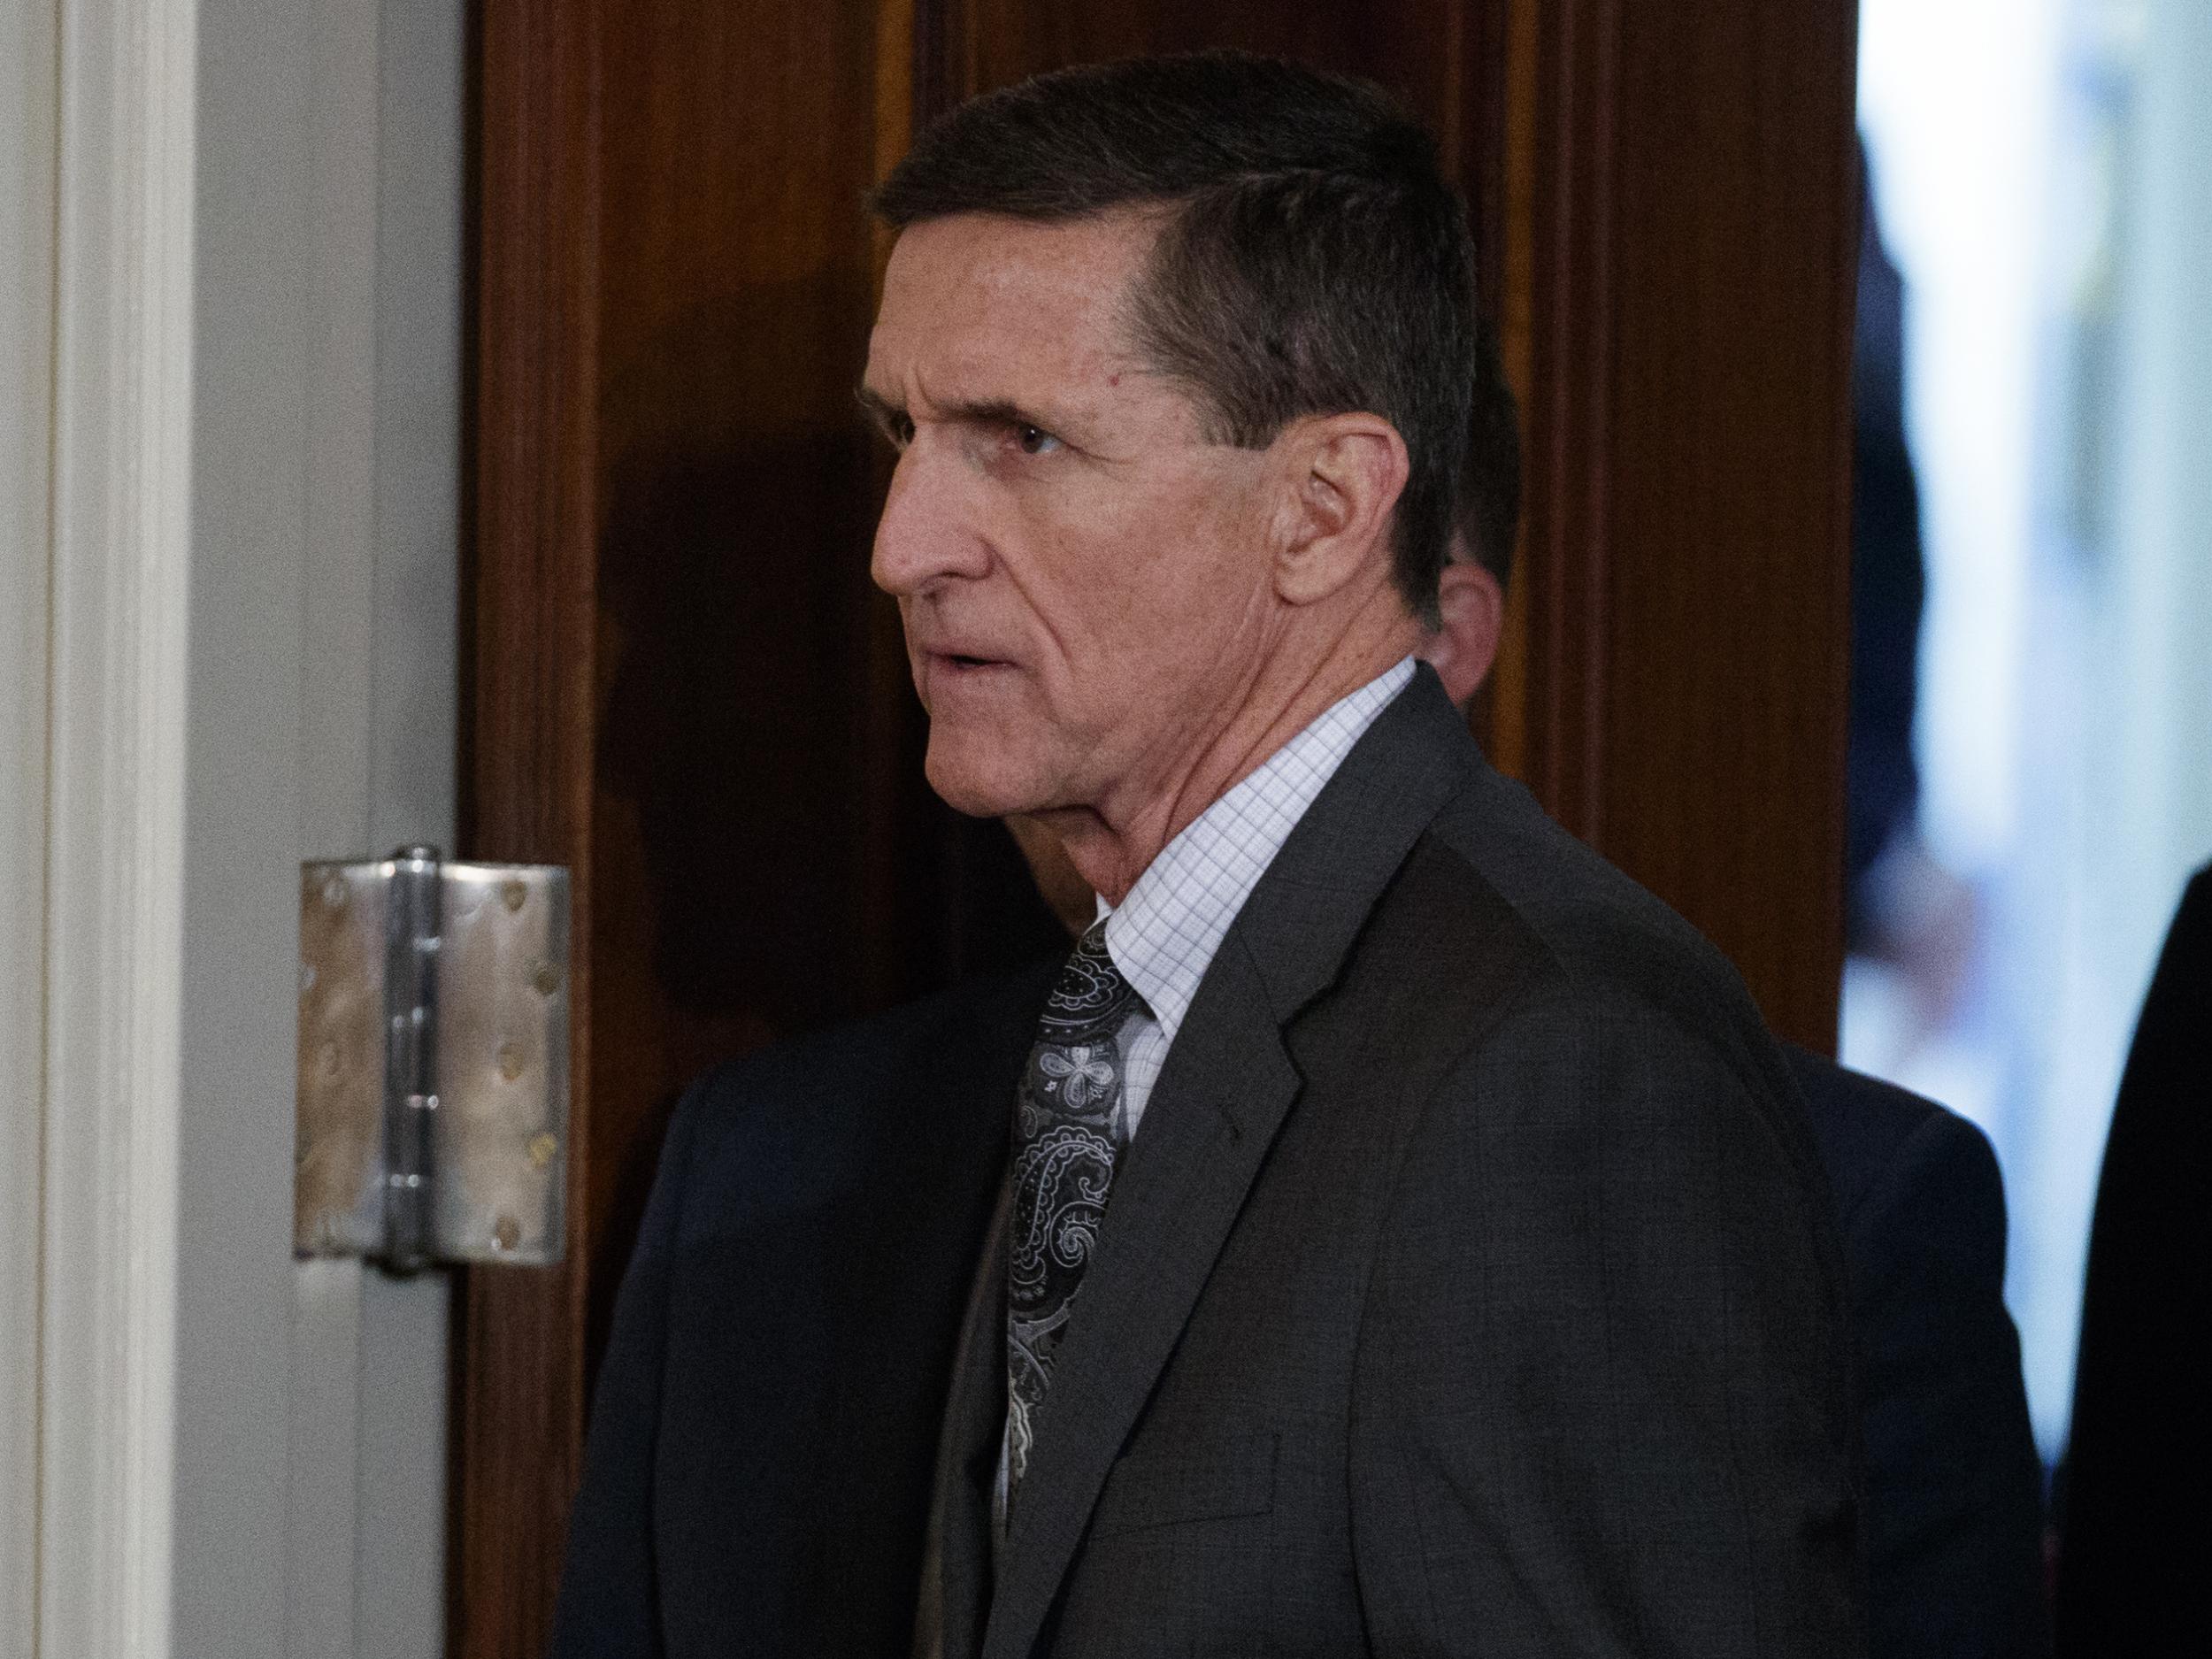 Mike Flynn was ousted as national security adviser after revelations of conversations with Russian Ambassador Kislyak